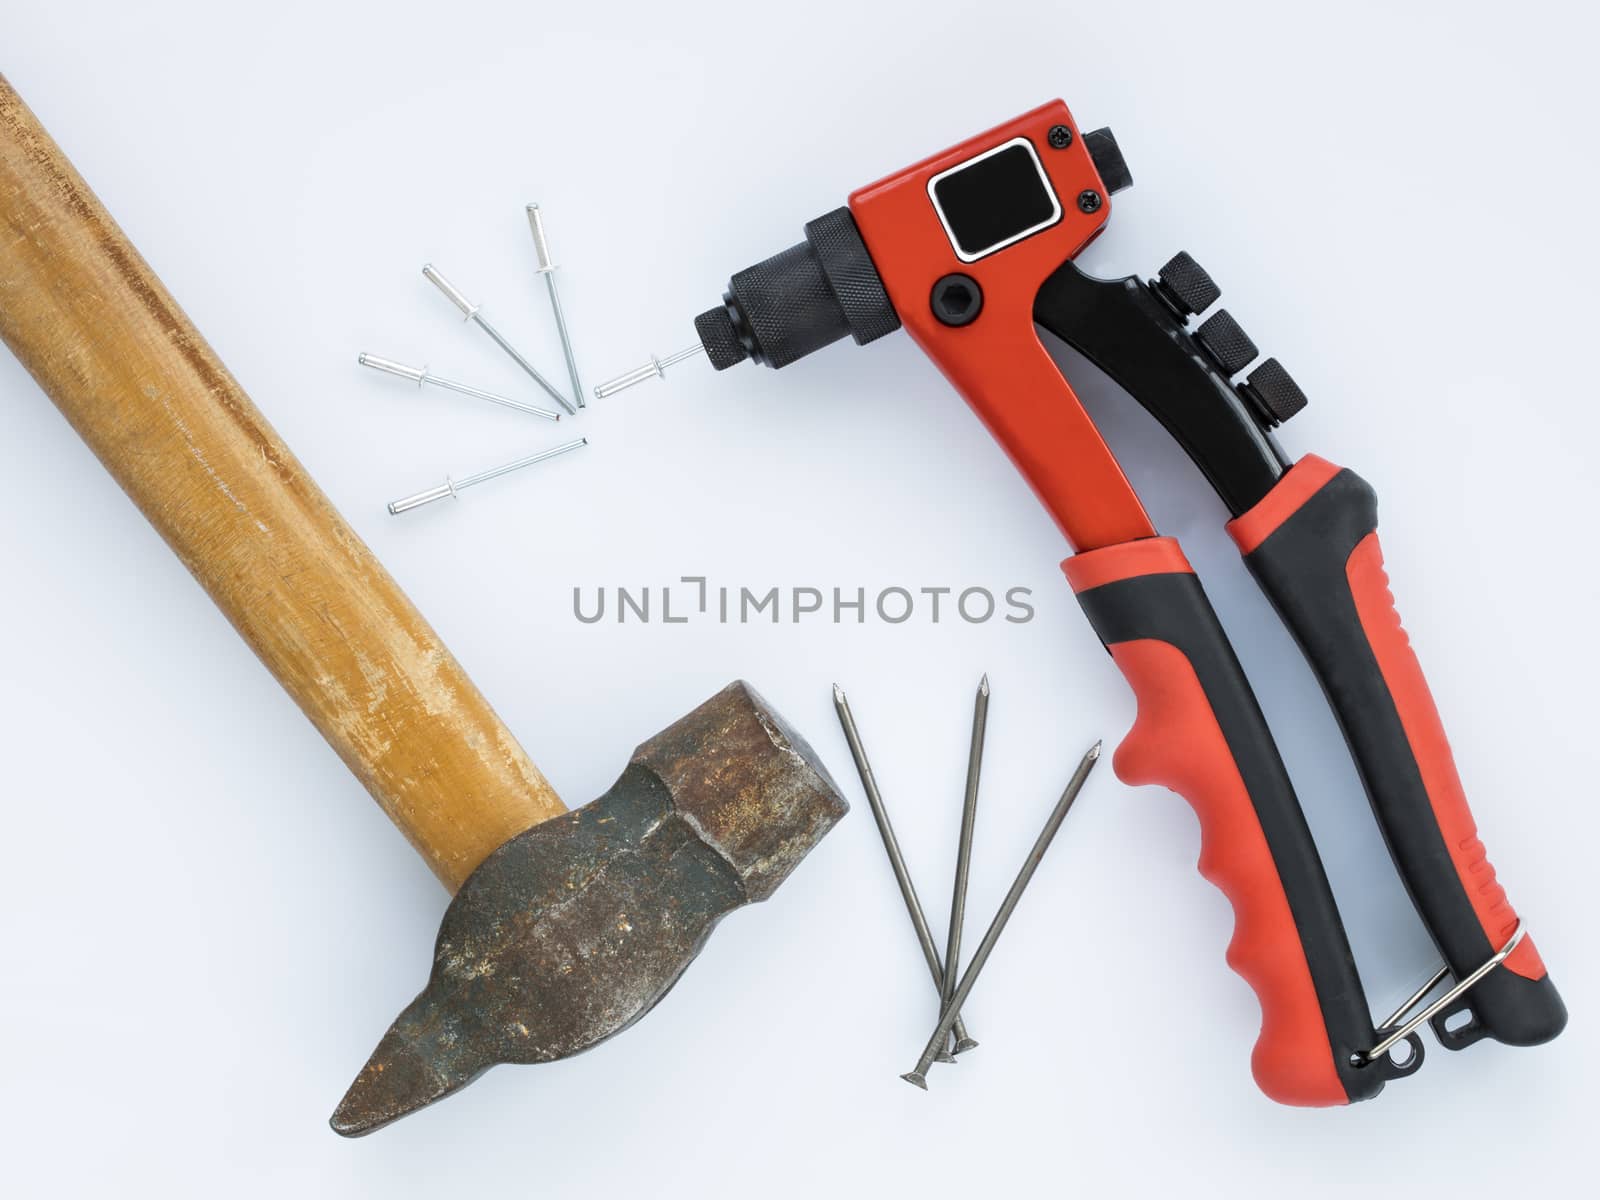 Old hammer and nails against new Rivet Gun and Rivets by Sergii